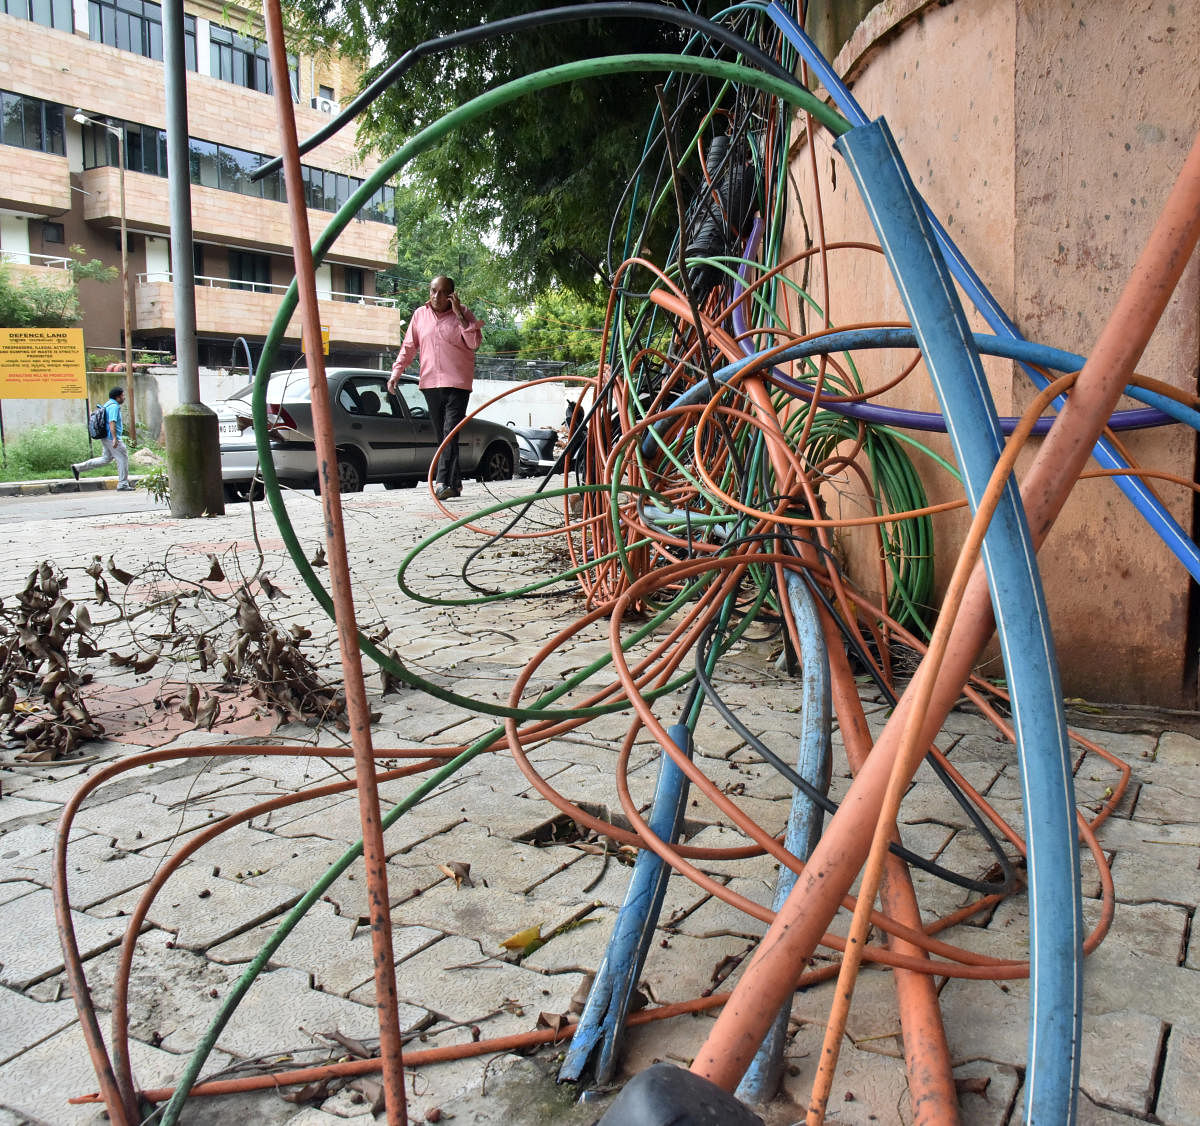 While officials say cables can be installed only underground, it's common to find OFCs strewn on city streets. DH FILE PHOTO